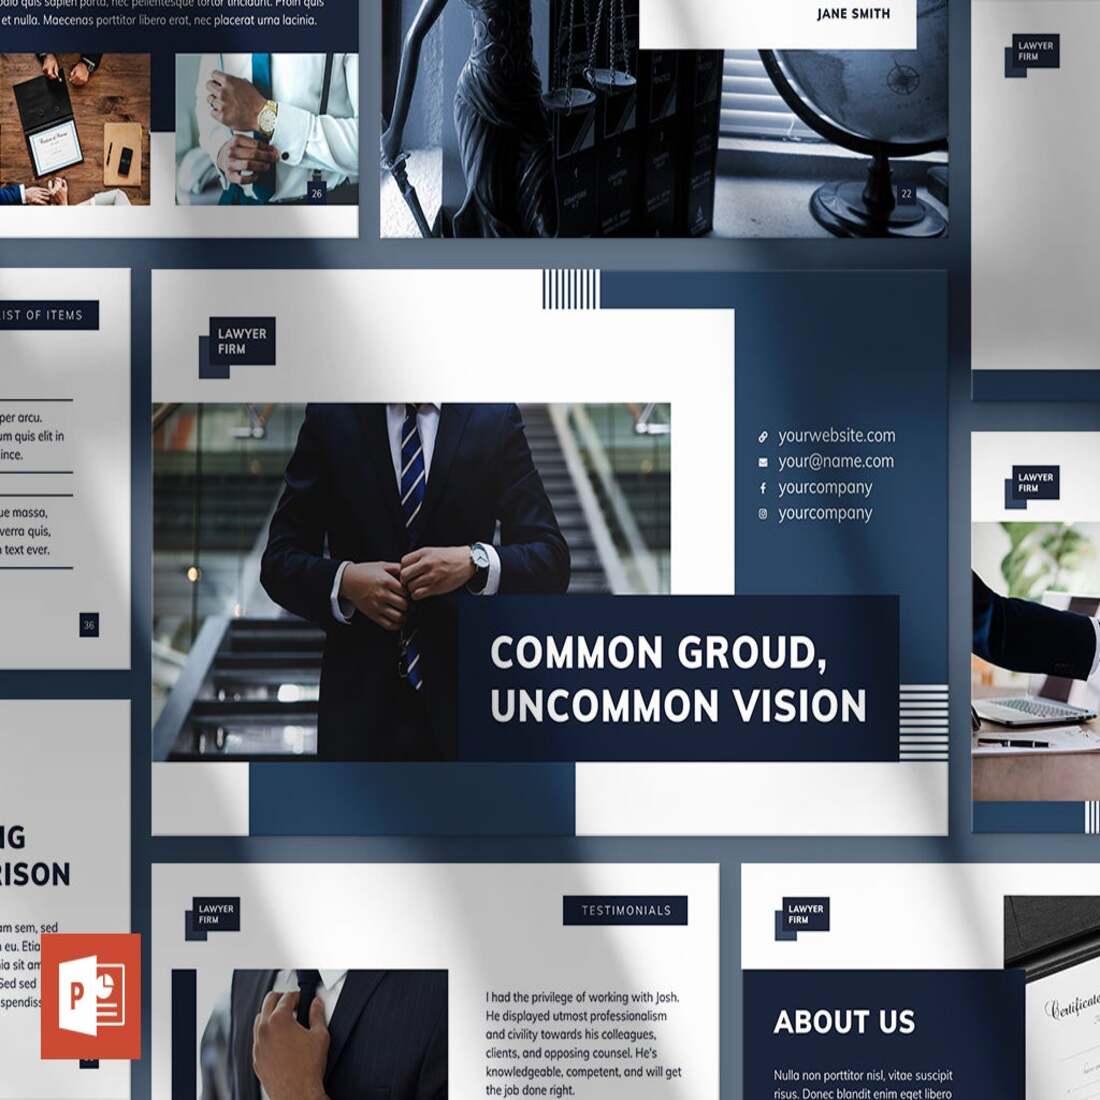 Law Firm PowerPoint Presentation Template main cover.